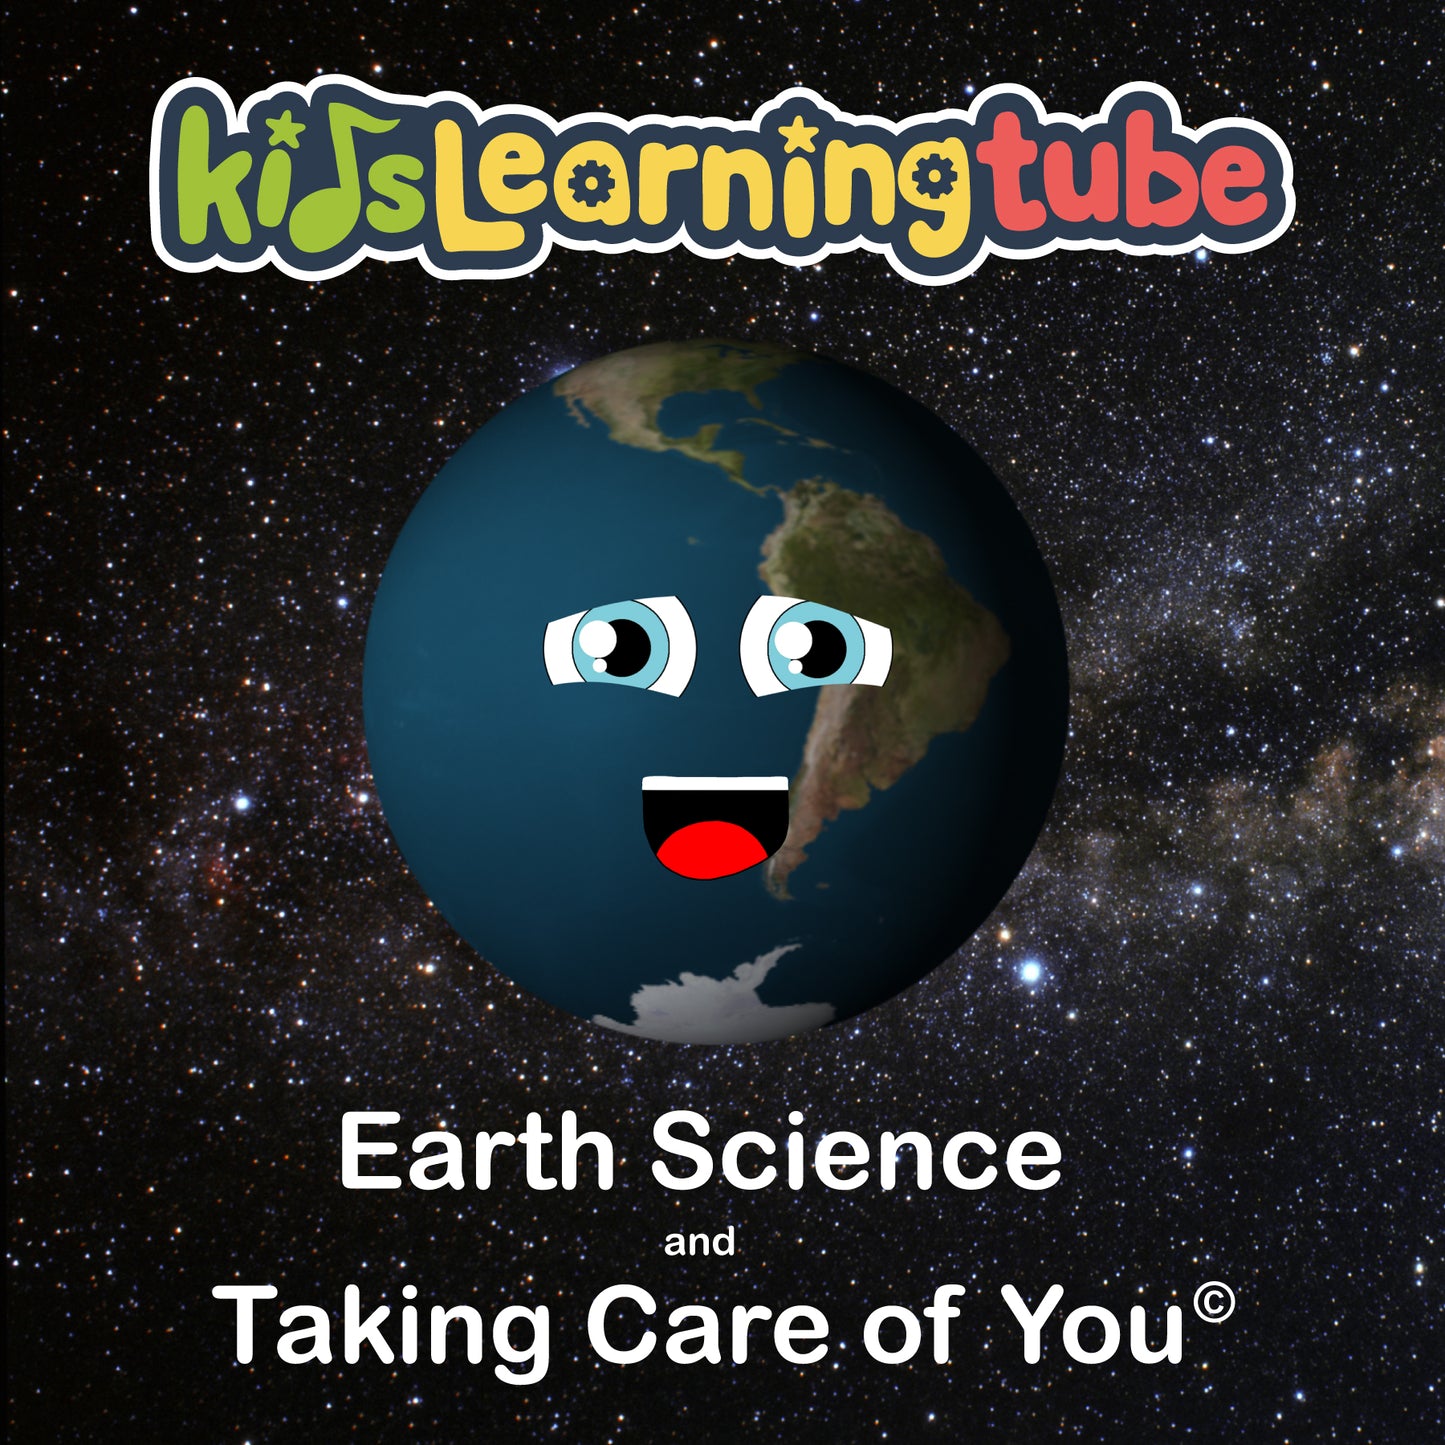 Earth Science and Taking Care of You Digital Album